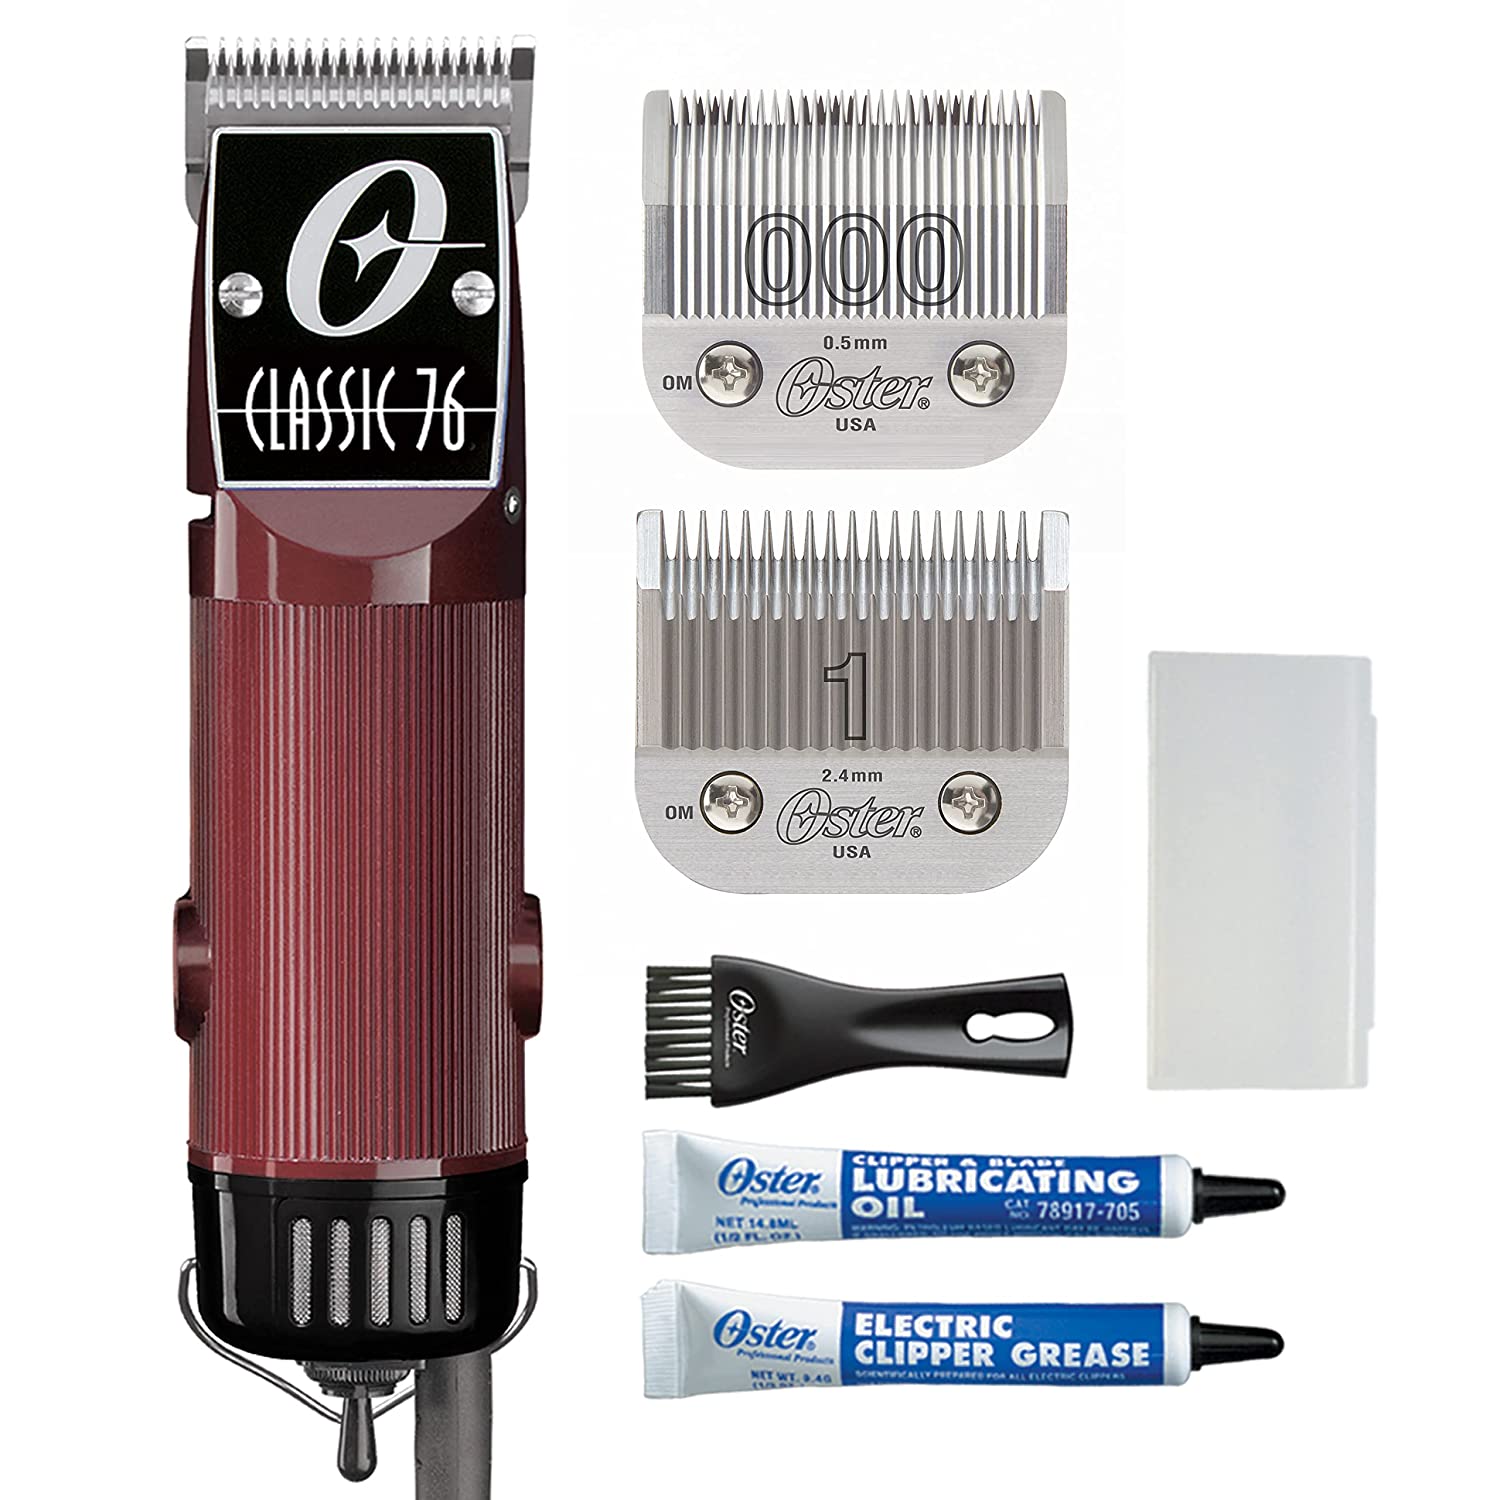 OSTER Classic 76 Single Speed Hair Clippers